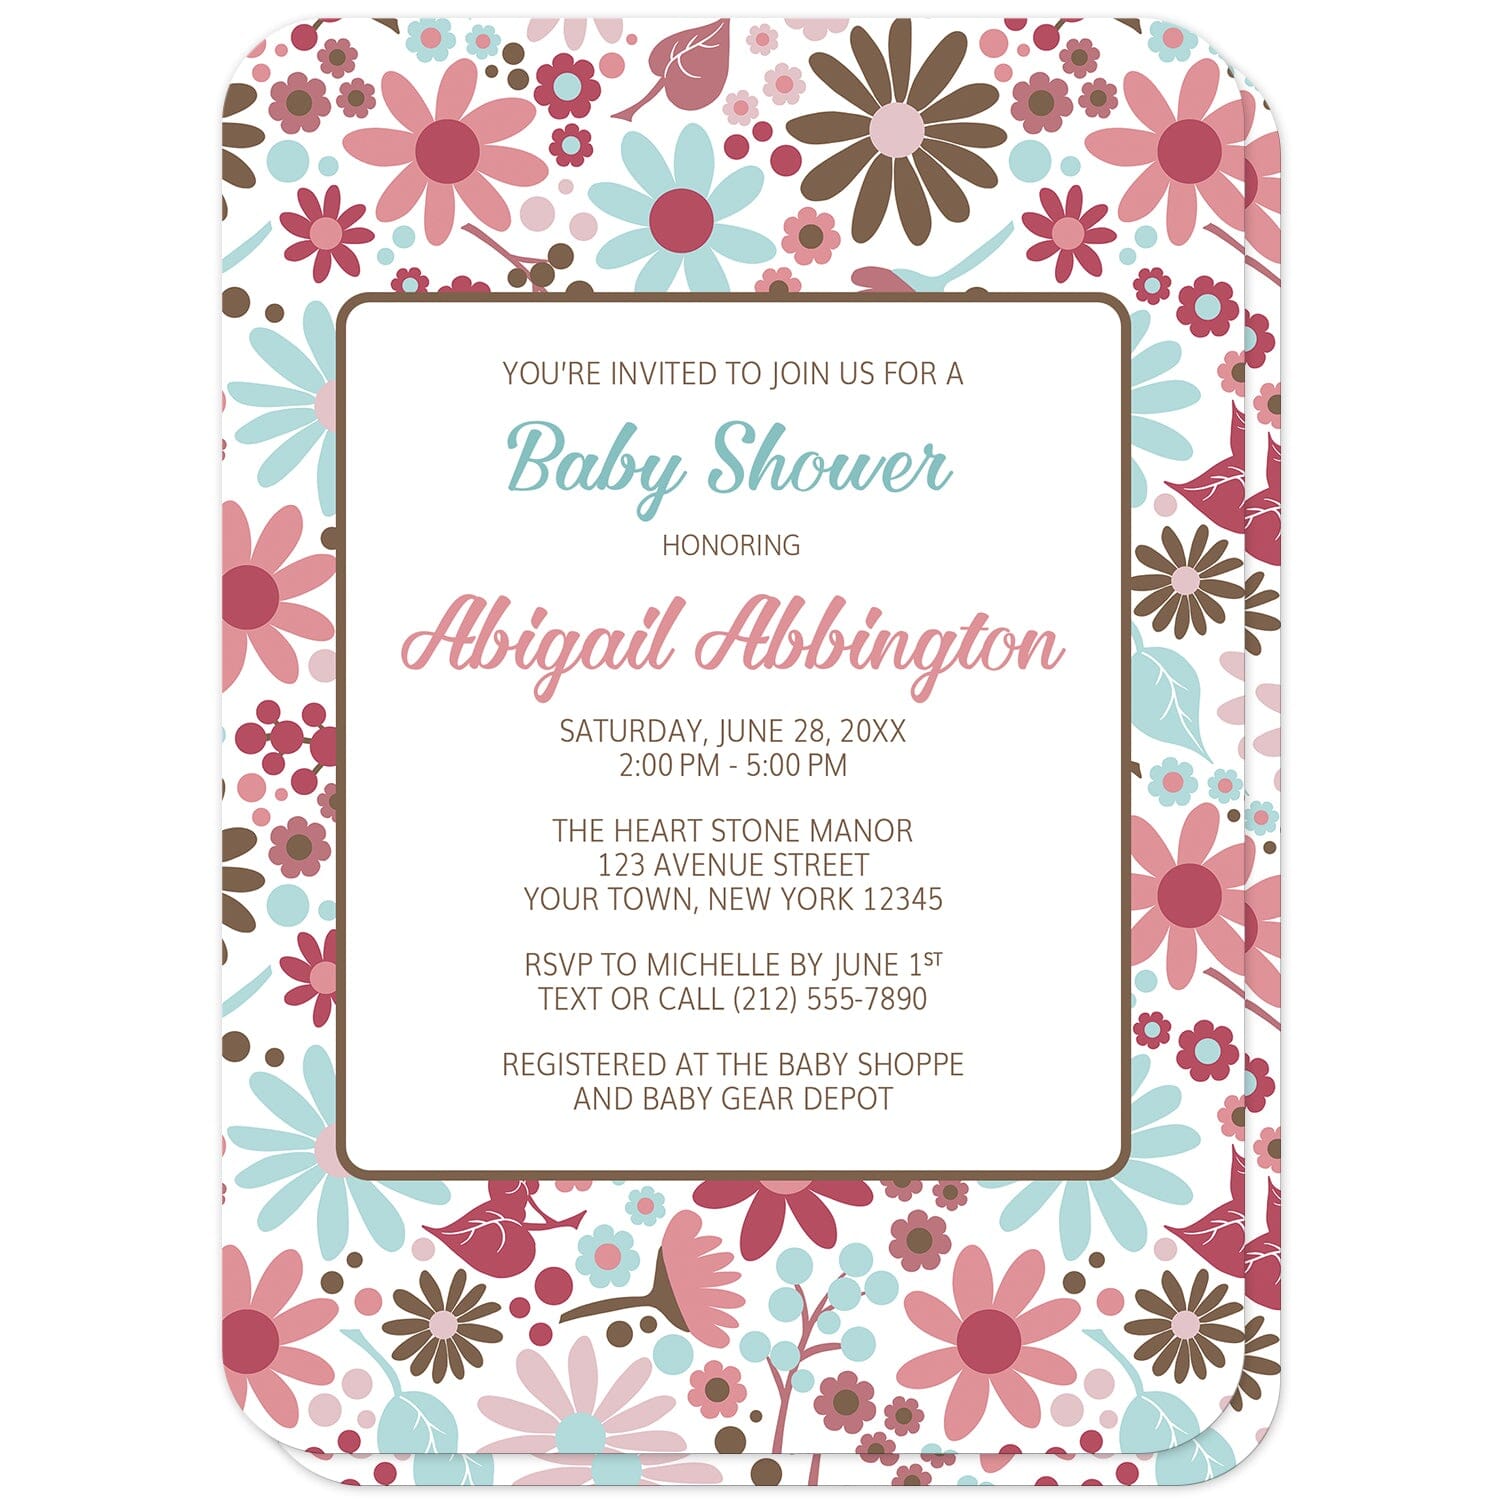 Berry Blue Summer Flowers Baby Shower Invitations (front with rounded corners) at Artistically Invited. Beautiful berry blue summer flowers baby shower invitations designed with a pretty summer floral pattern in different hues of berry pink with blue and brown. Personalize these invitations with your baby shower celebration details in blue, pink, and brown. 